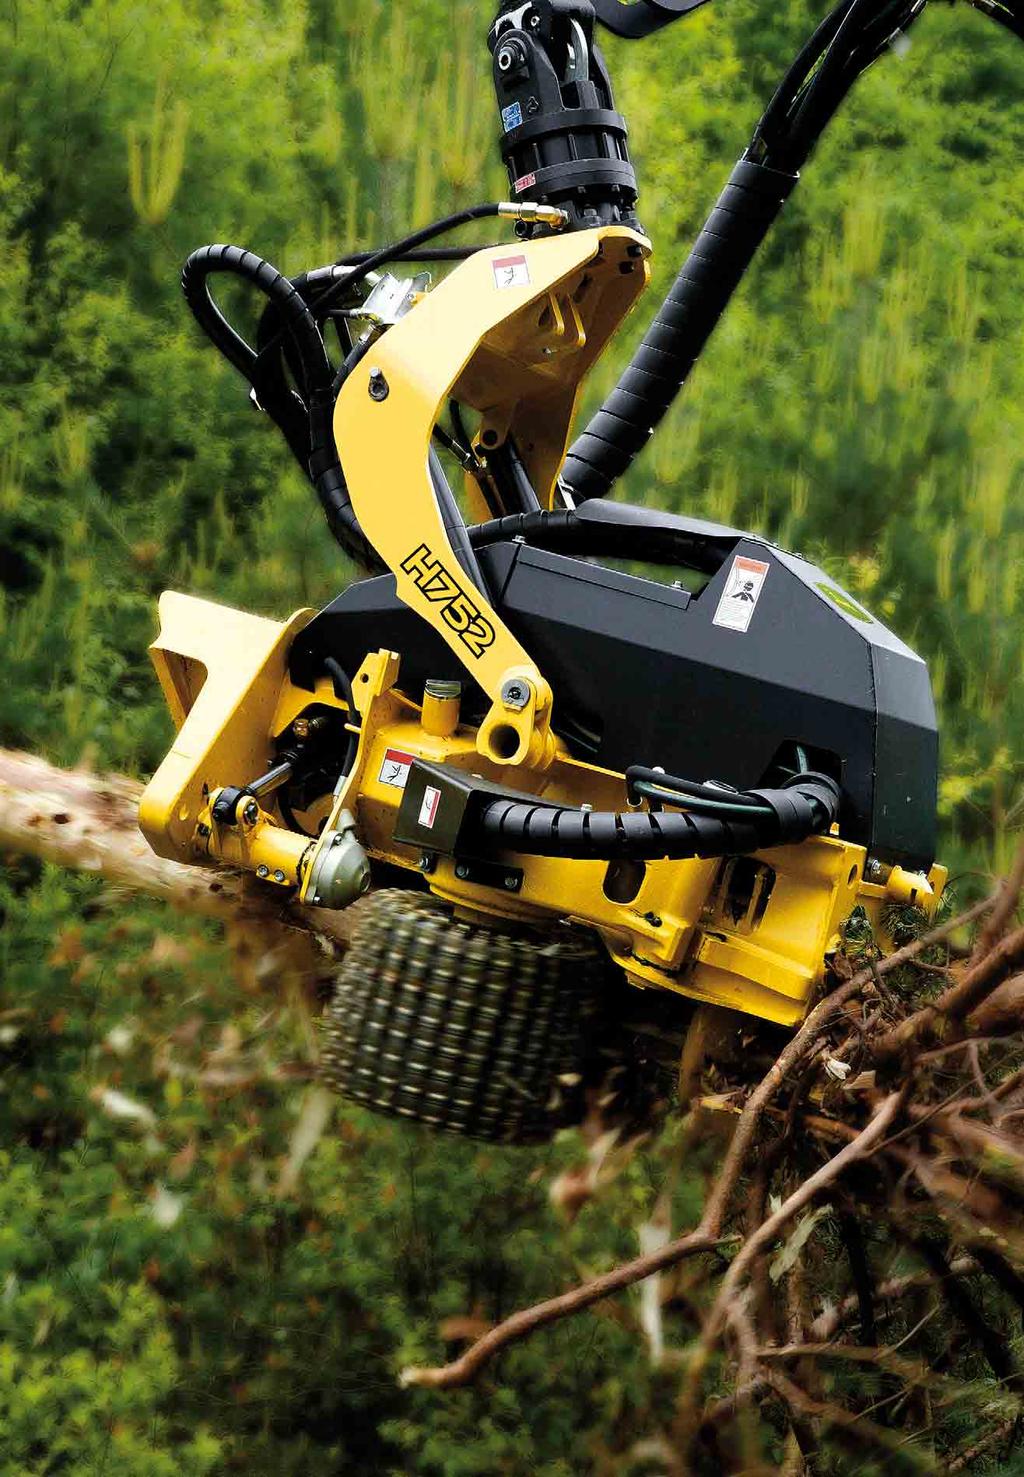 Nothing runs like a Deere The cornerstones of E-Series forest machinery design are productivity, uptime, and low daily operating costs.